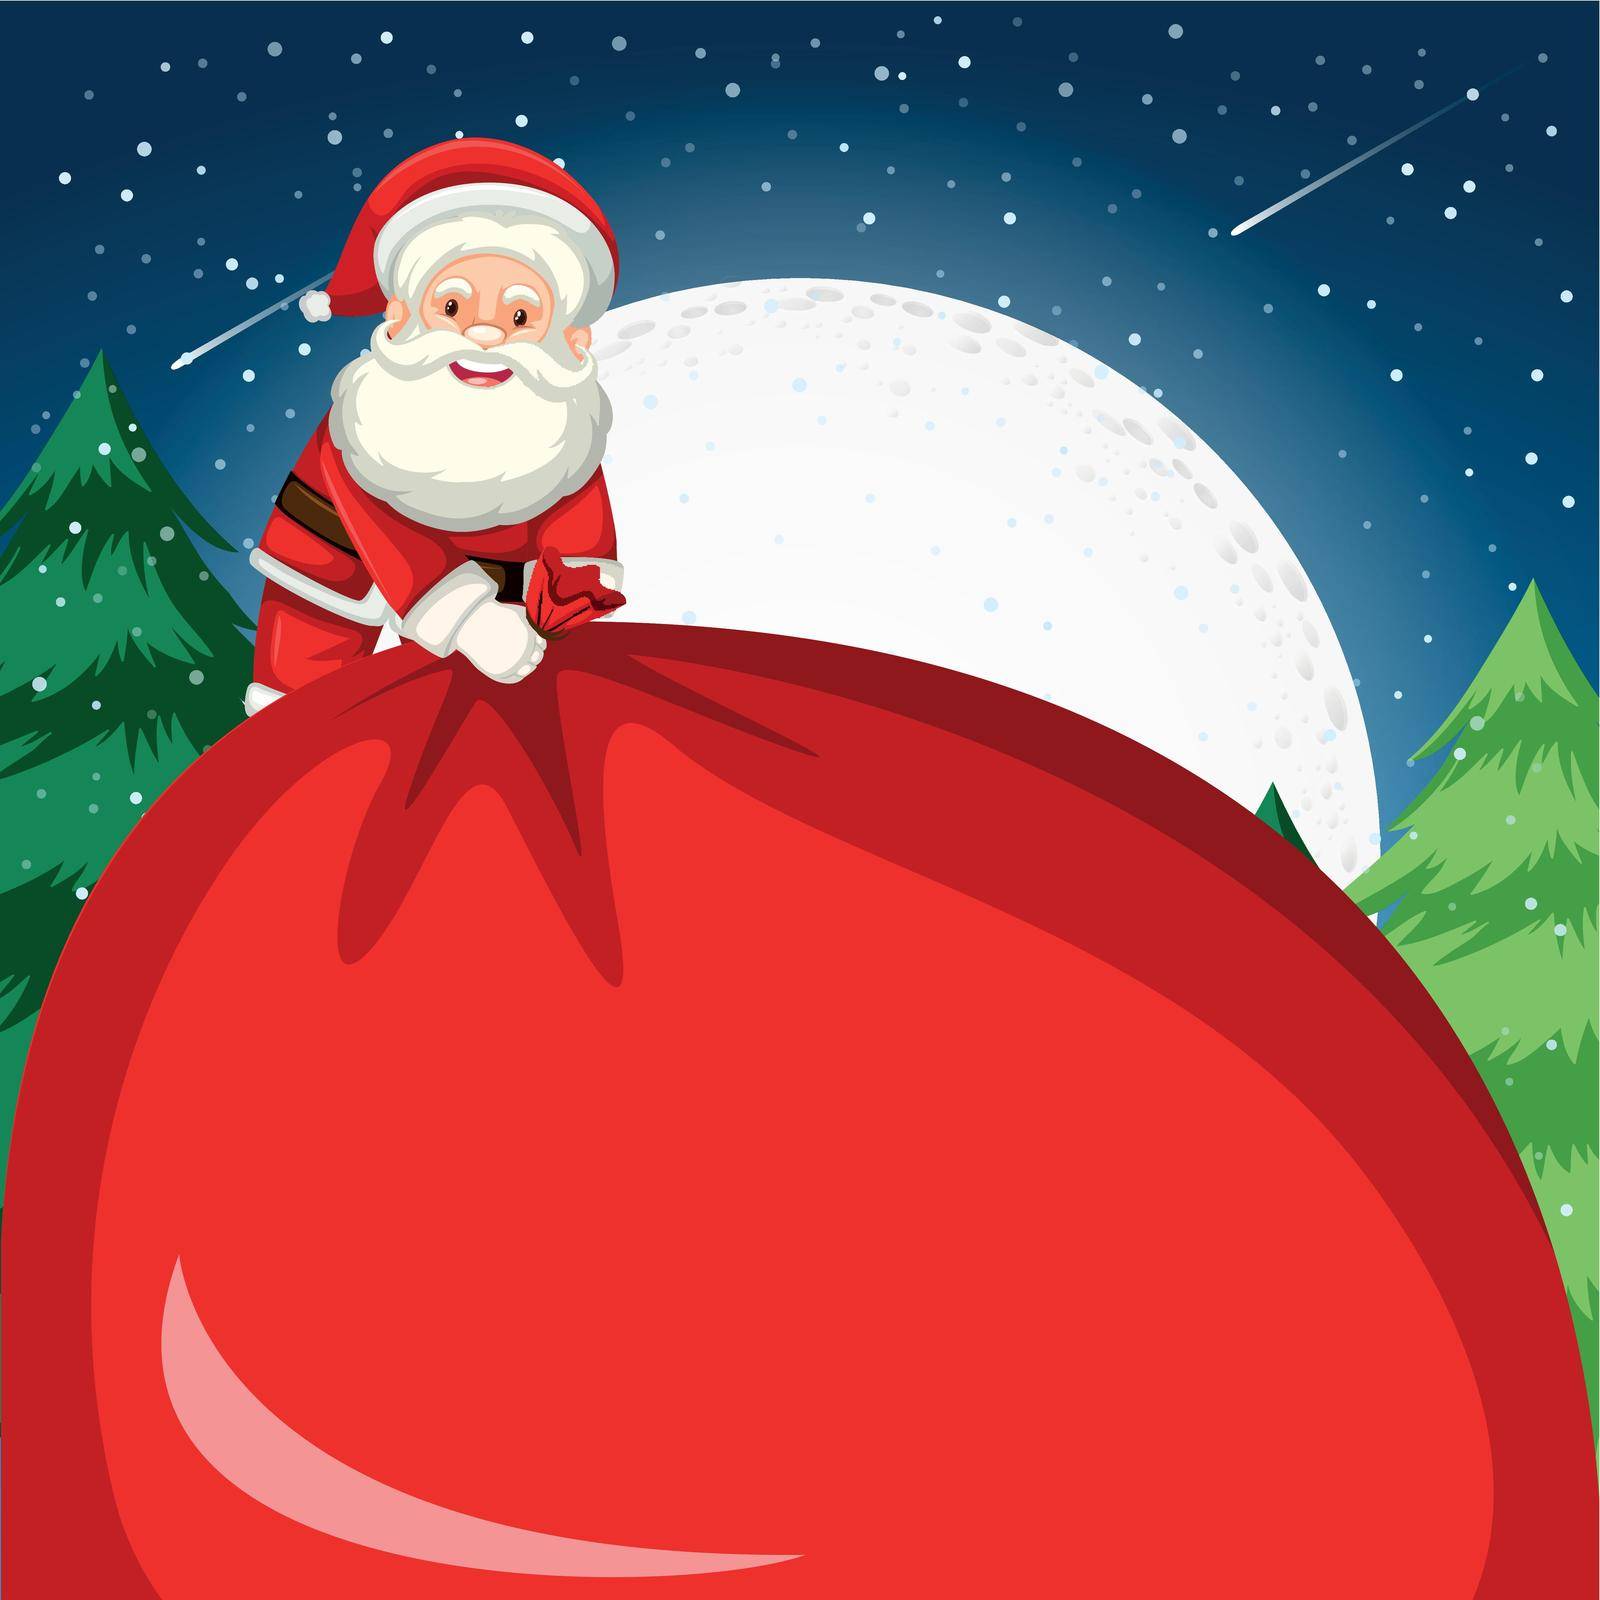 Santa holding a large sack by iimages